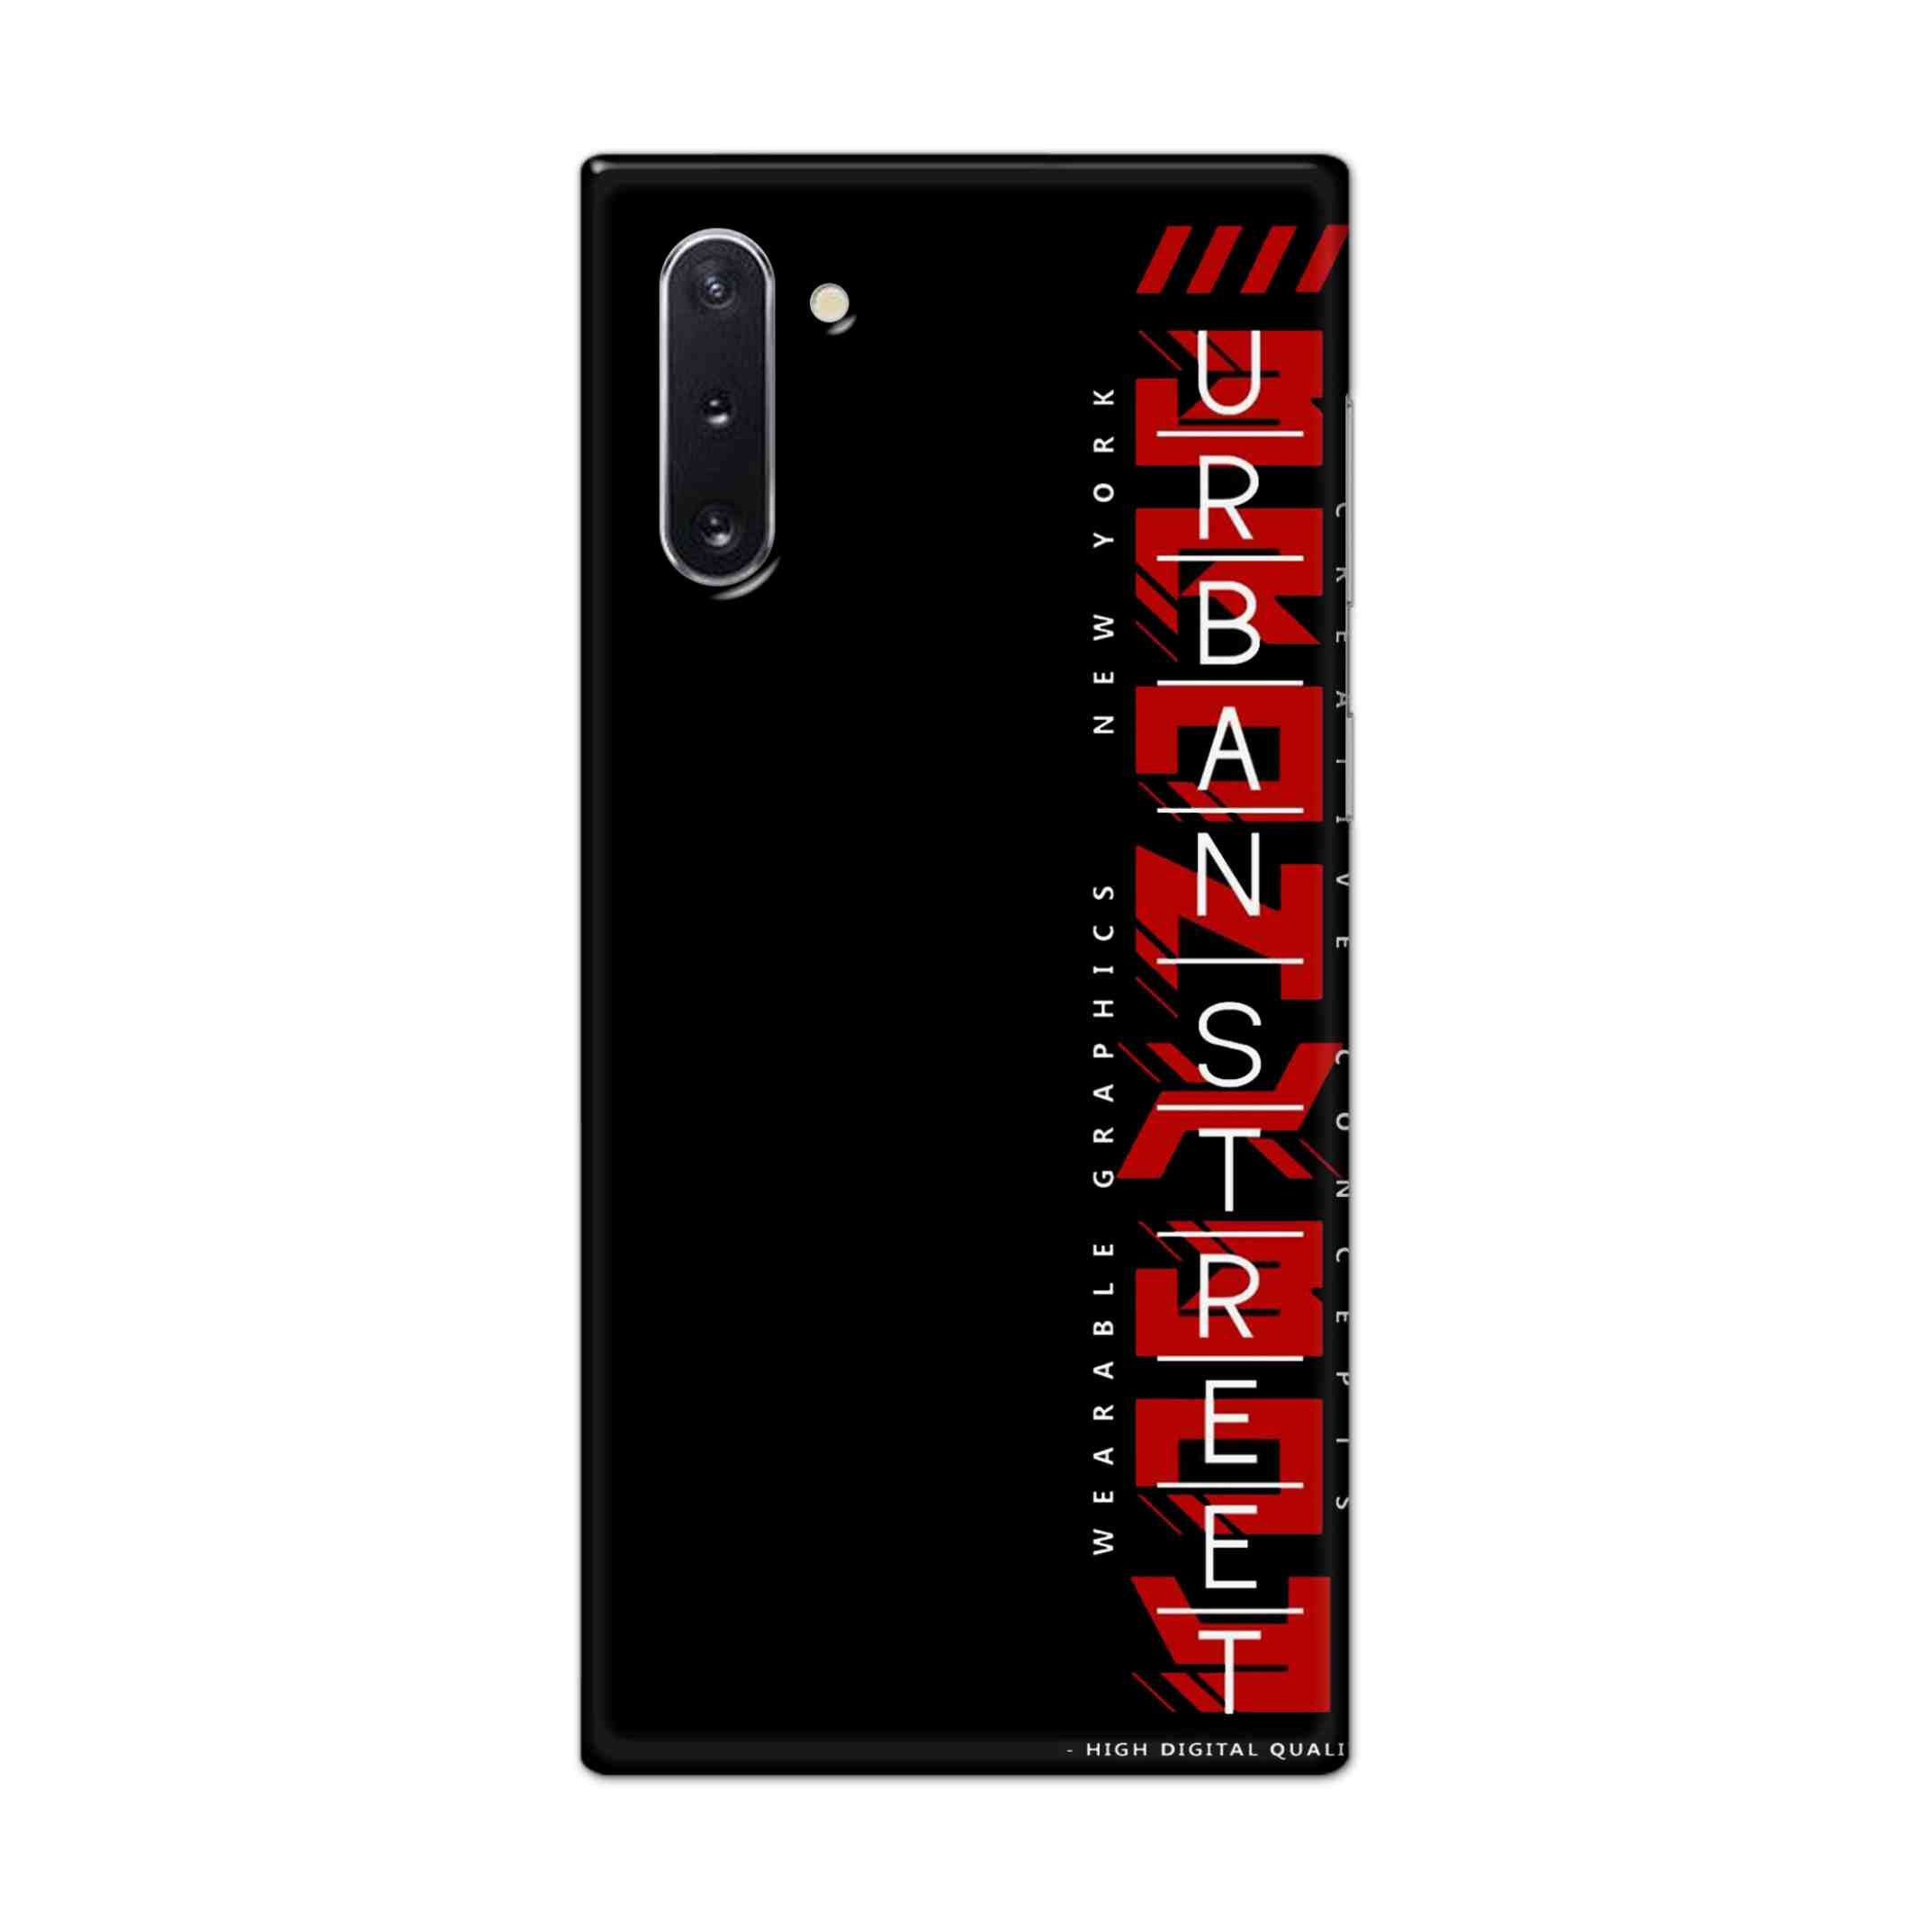 Buy Urban Street Hard Back Mobile Phone Case Cover For Samsung Galaxy Note 10 Online